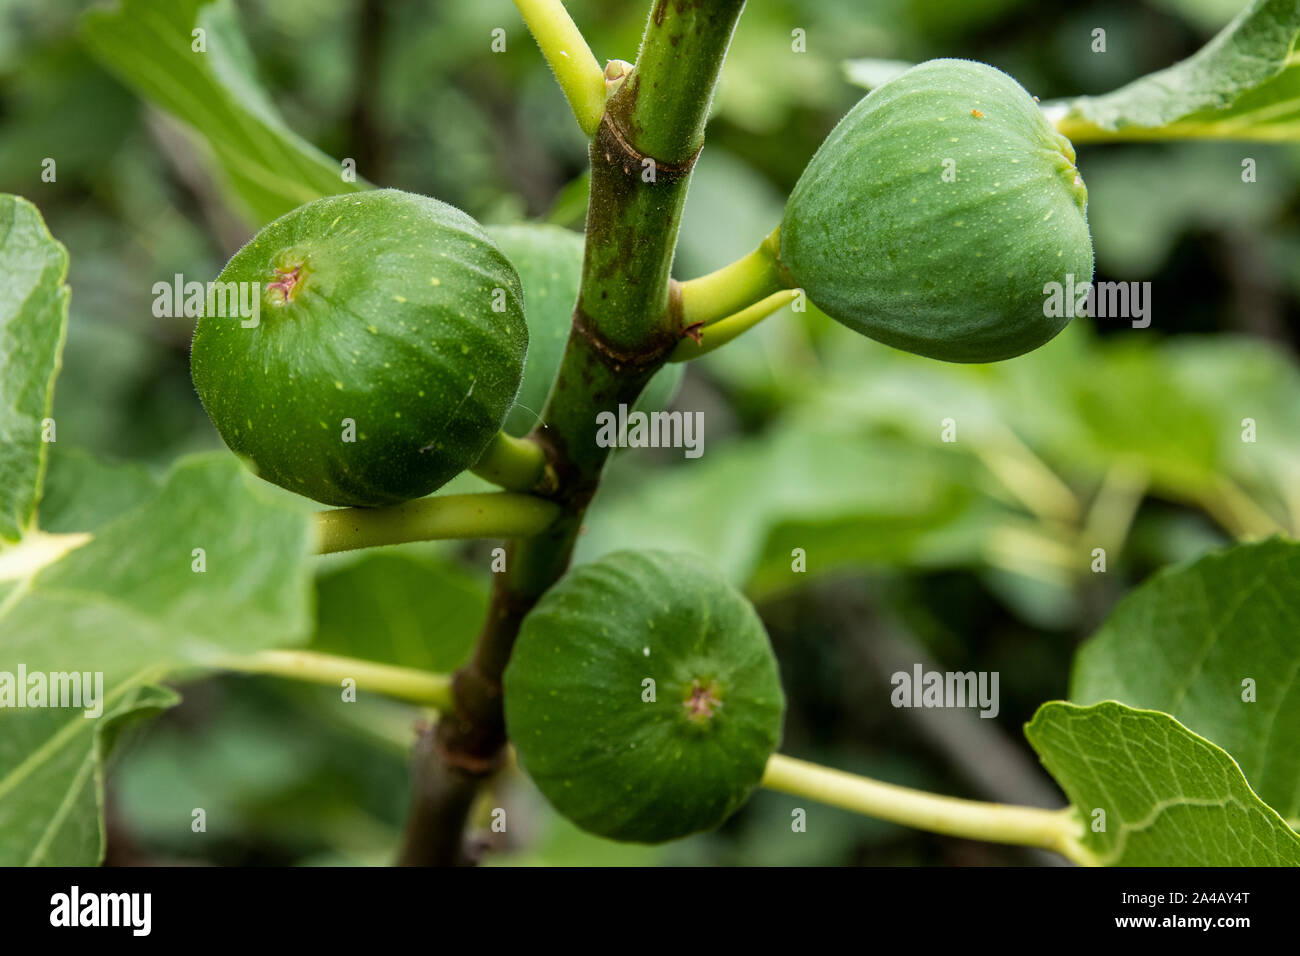 46/5000Green figs in the tree. Close up photography Stock Photo